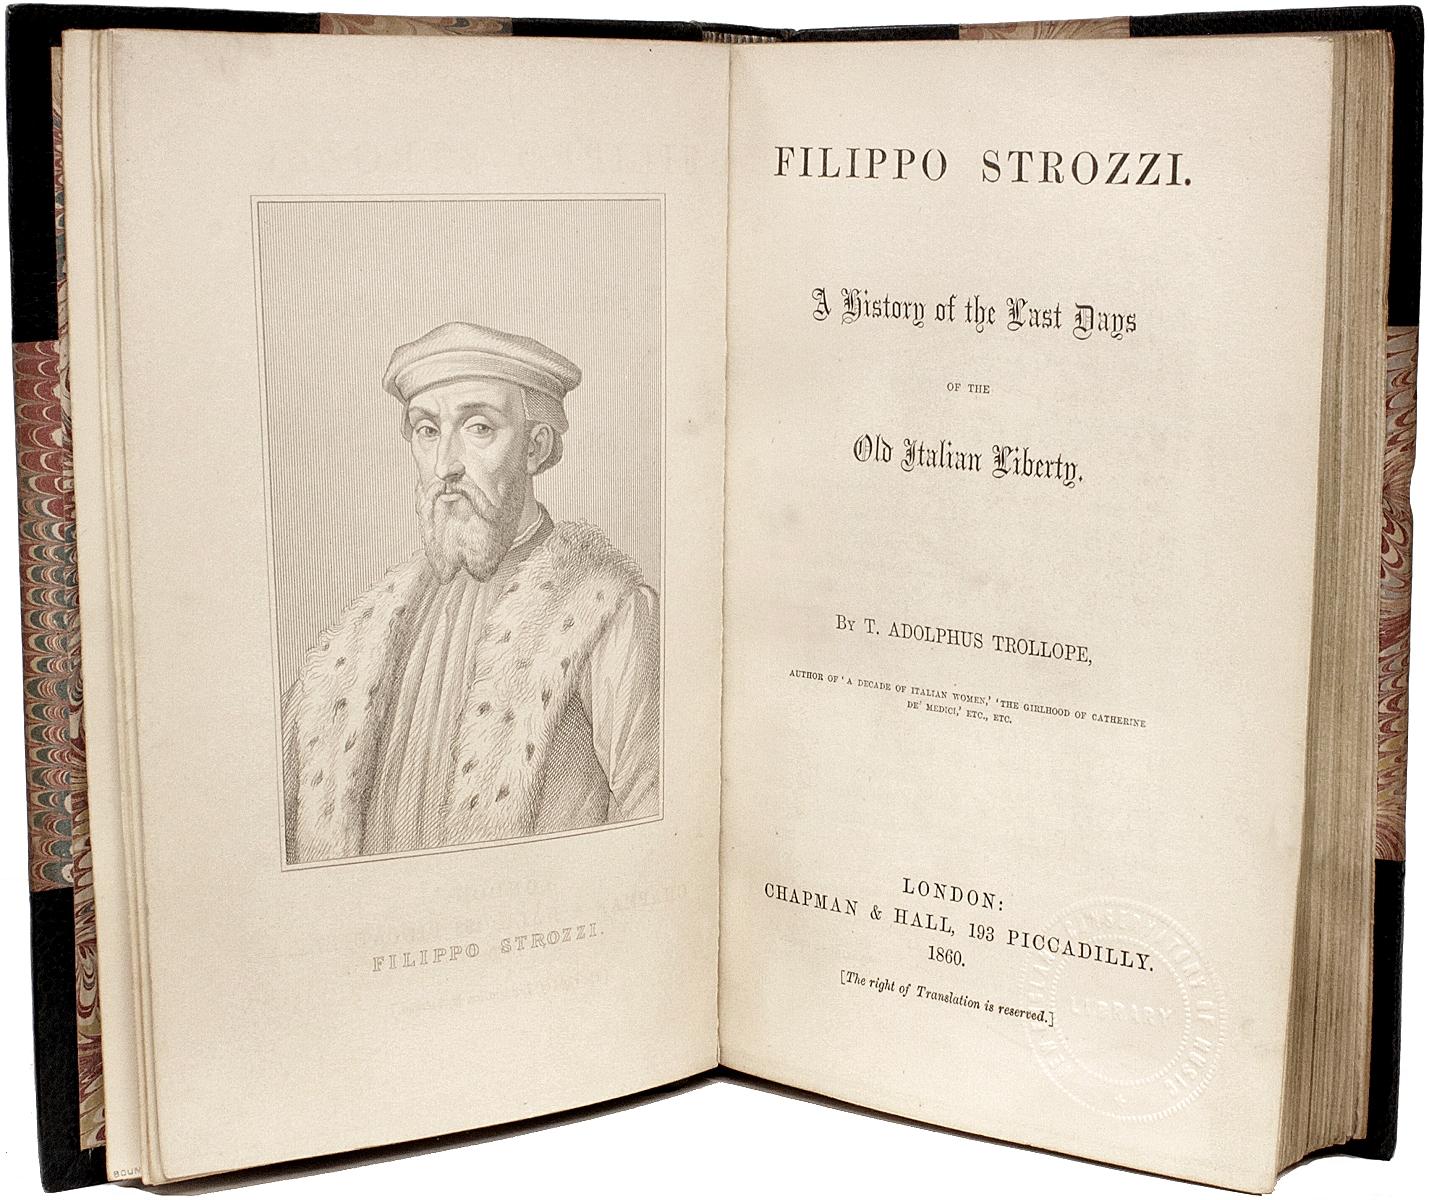 AUTHOR: TROLLOPE, T. Adolphus. 

TITLE: Filippo Strozzi. A History of the Last Days of The Old Italian Liberty.

PUBLISHER: London: Chapman & Hall, 1860.

DESCRIPTION: FIRST EDITION. 1 vol., 8